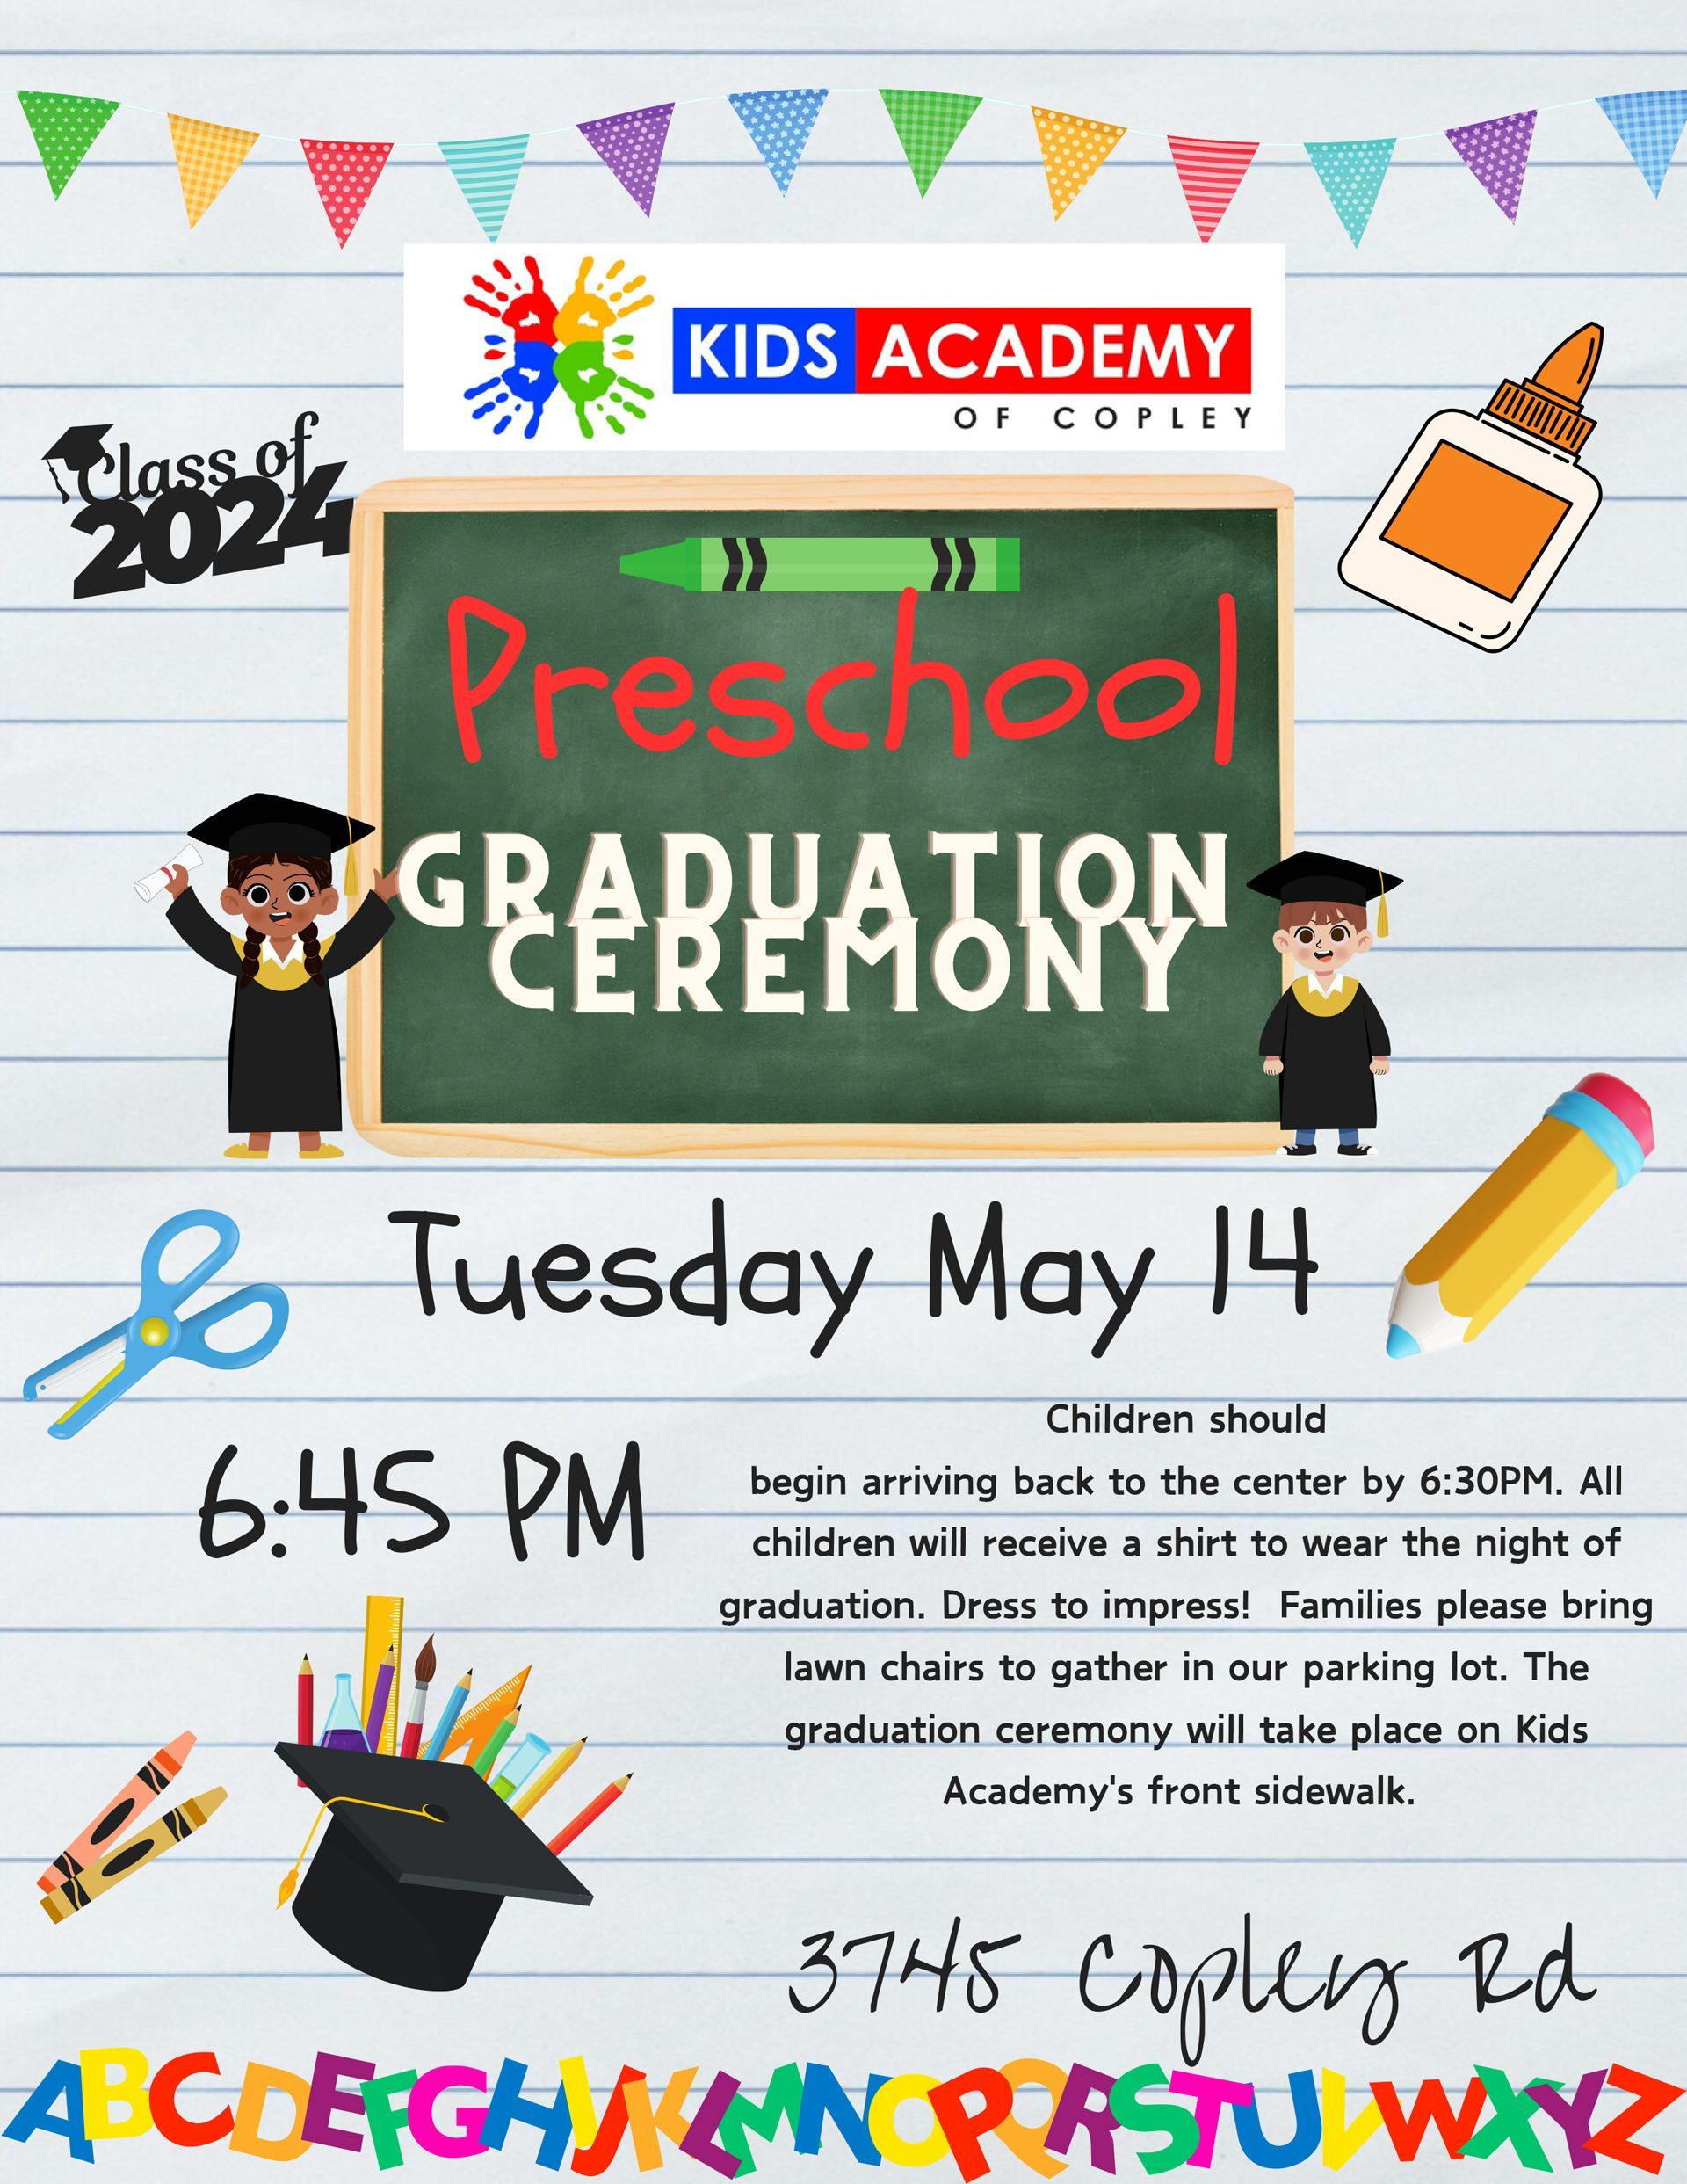 A poster for a preschool graduation ceremony on tuesday may 14